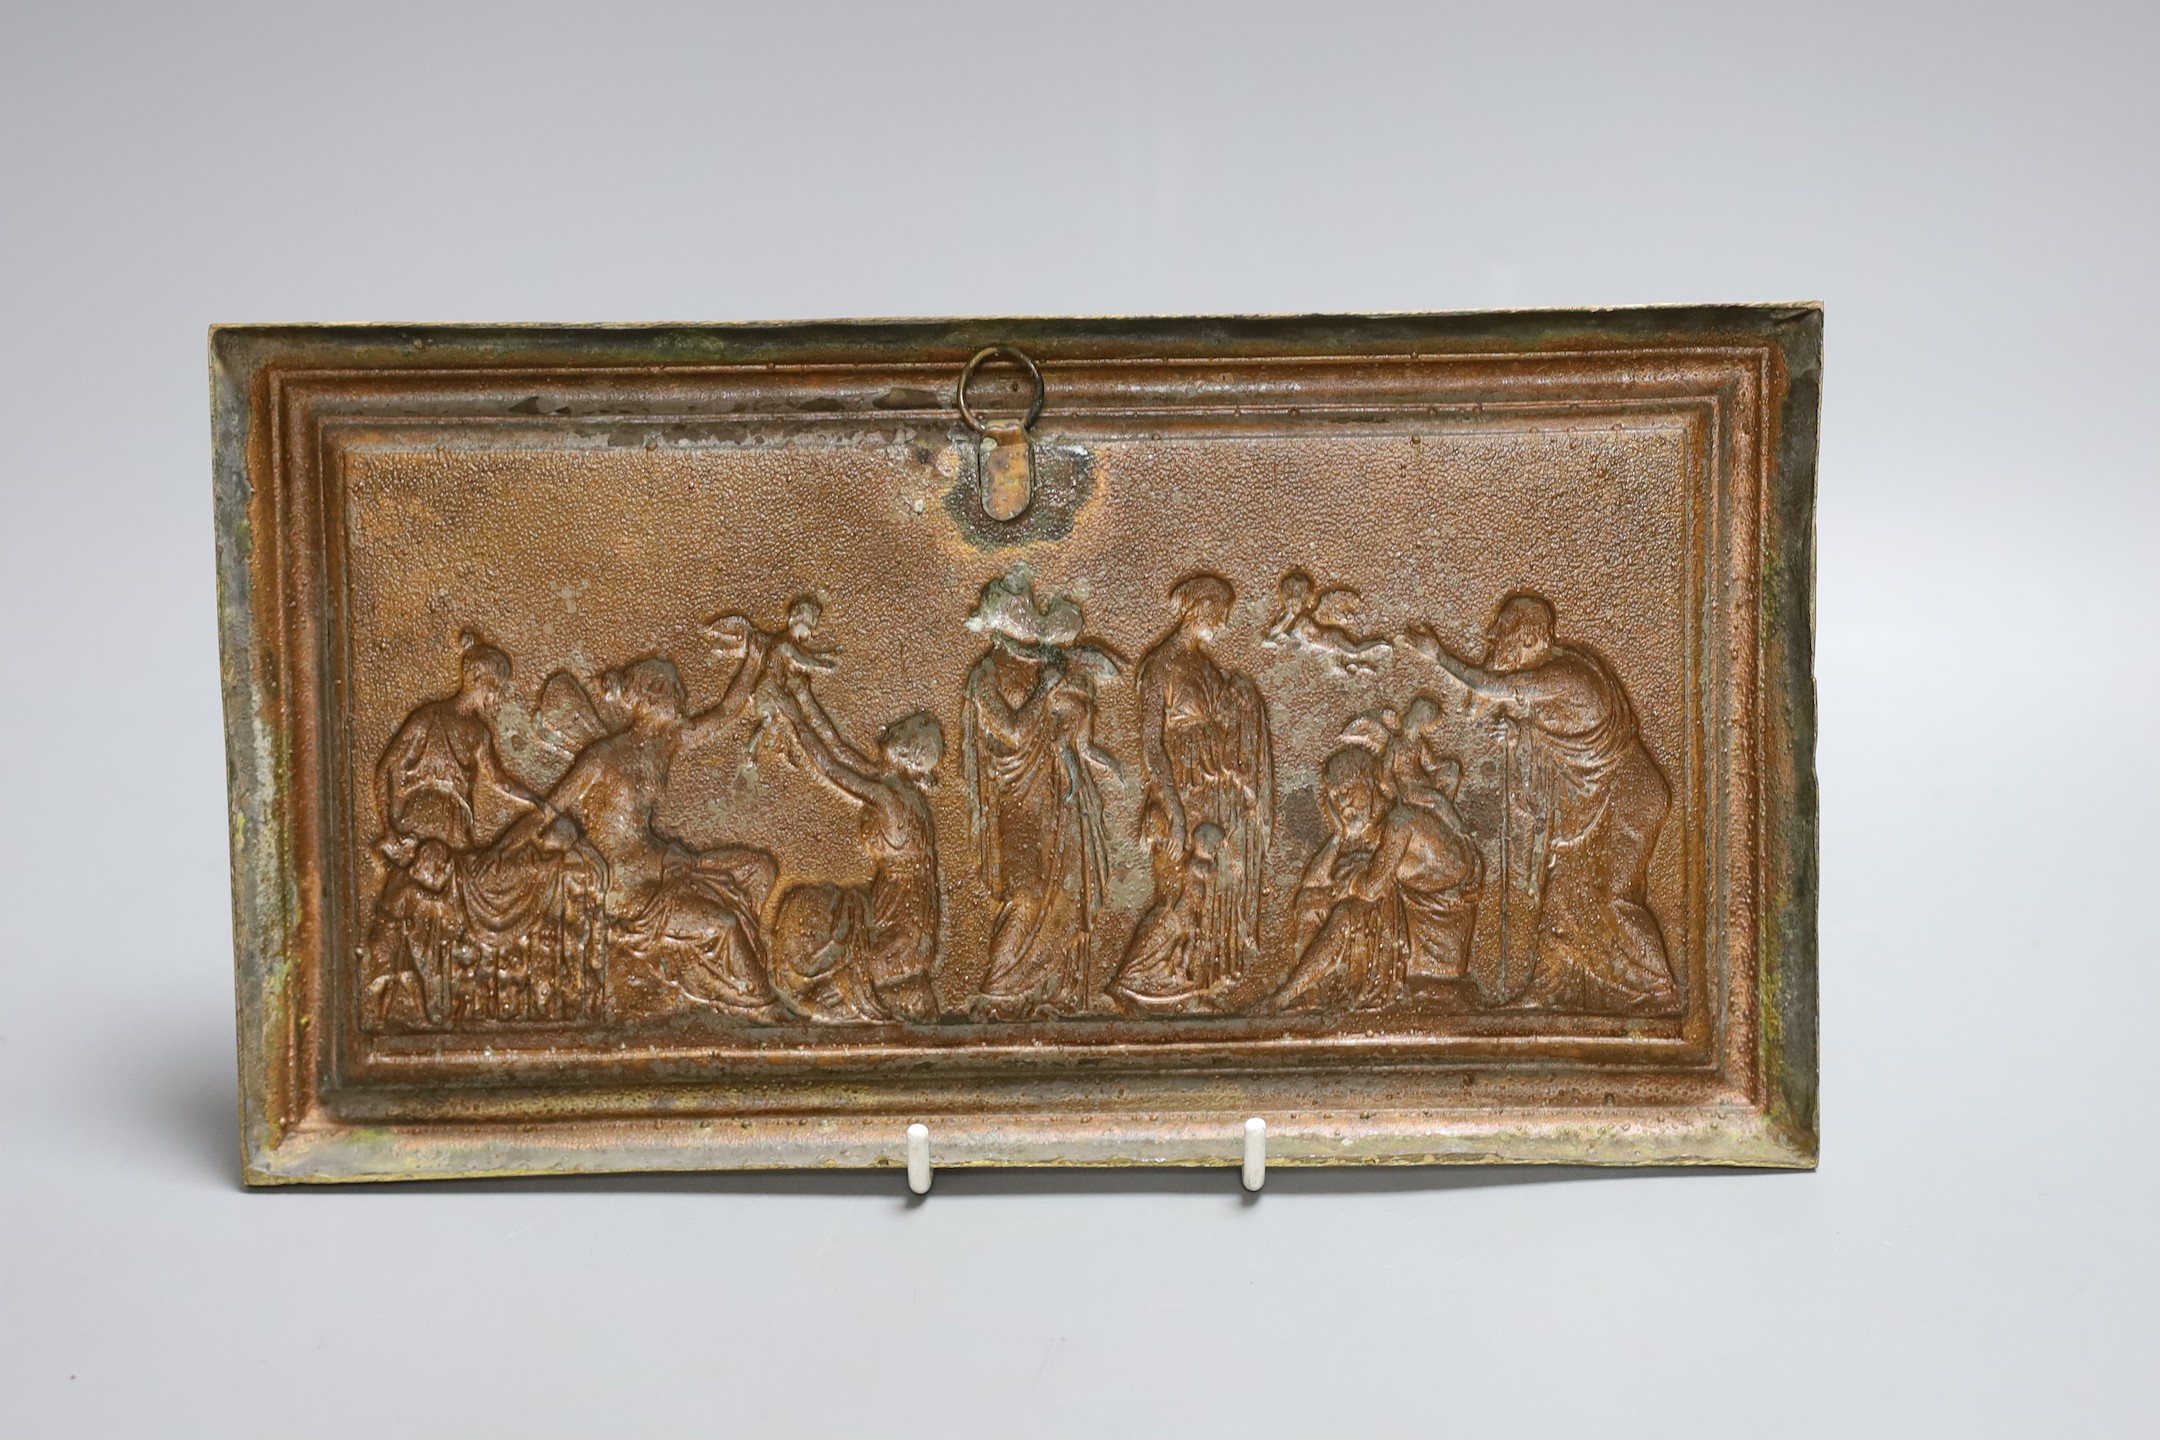 A gilt metal plaque depicting a classical scene, 15x27cm - Image 2 of 2